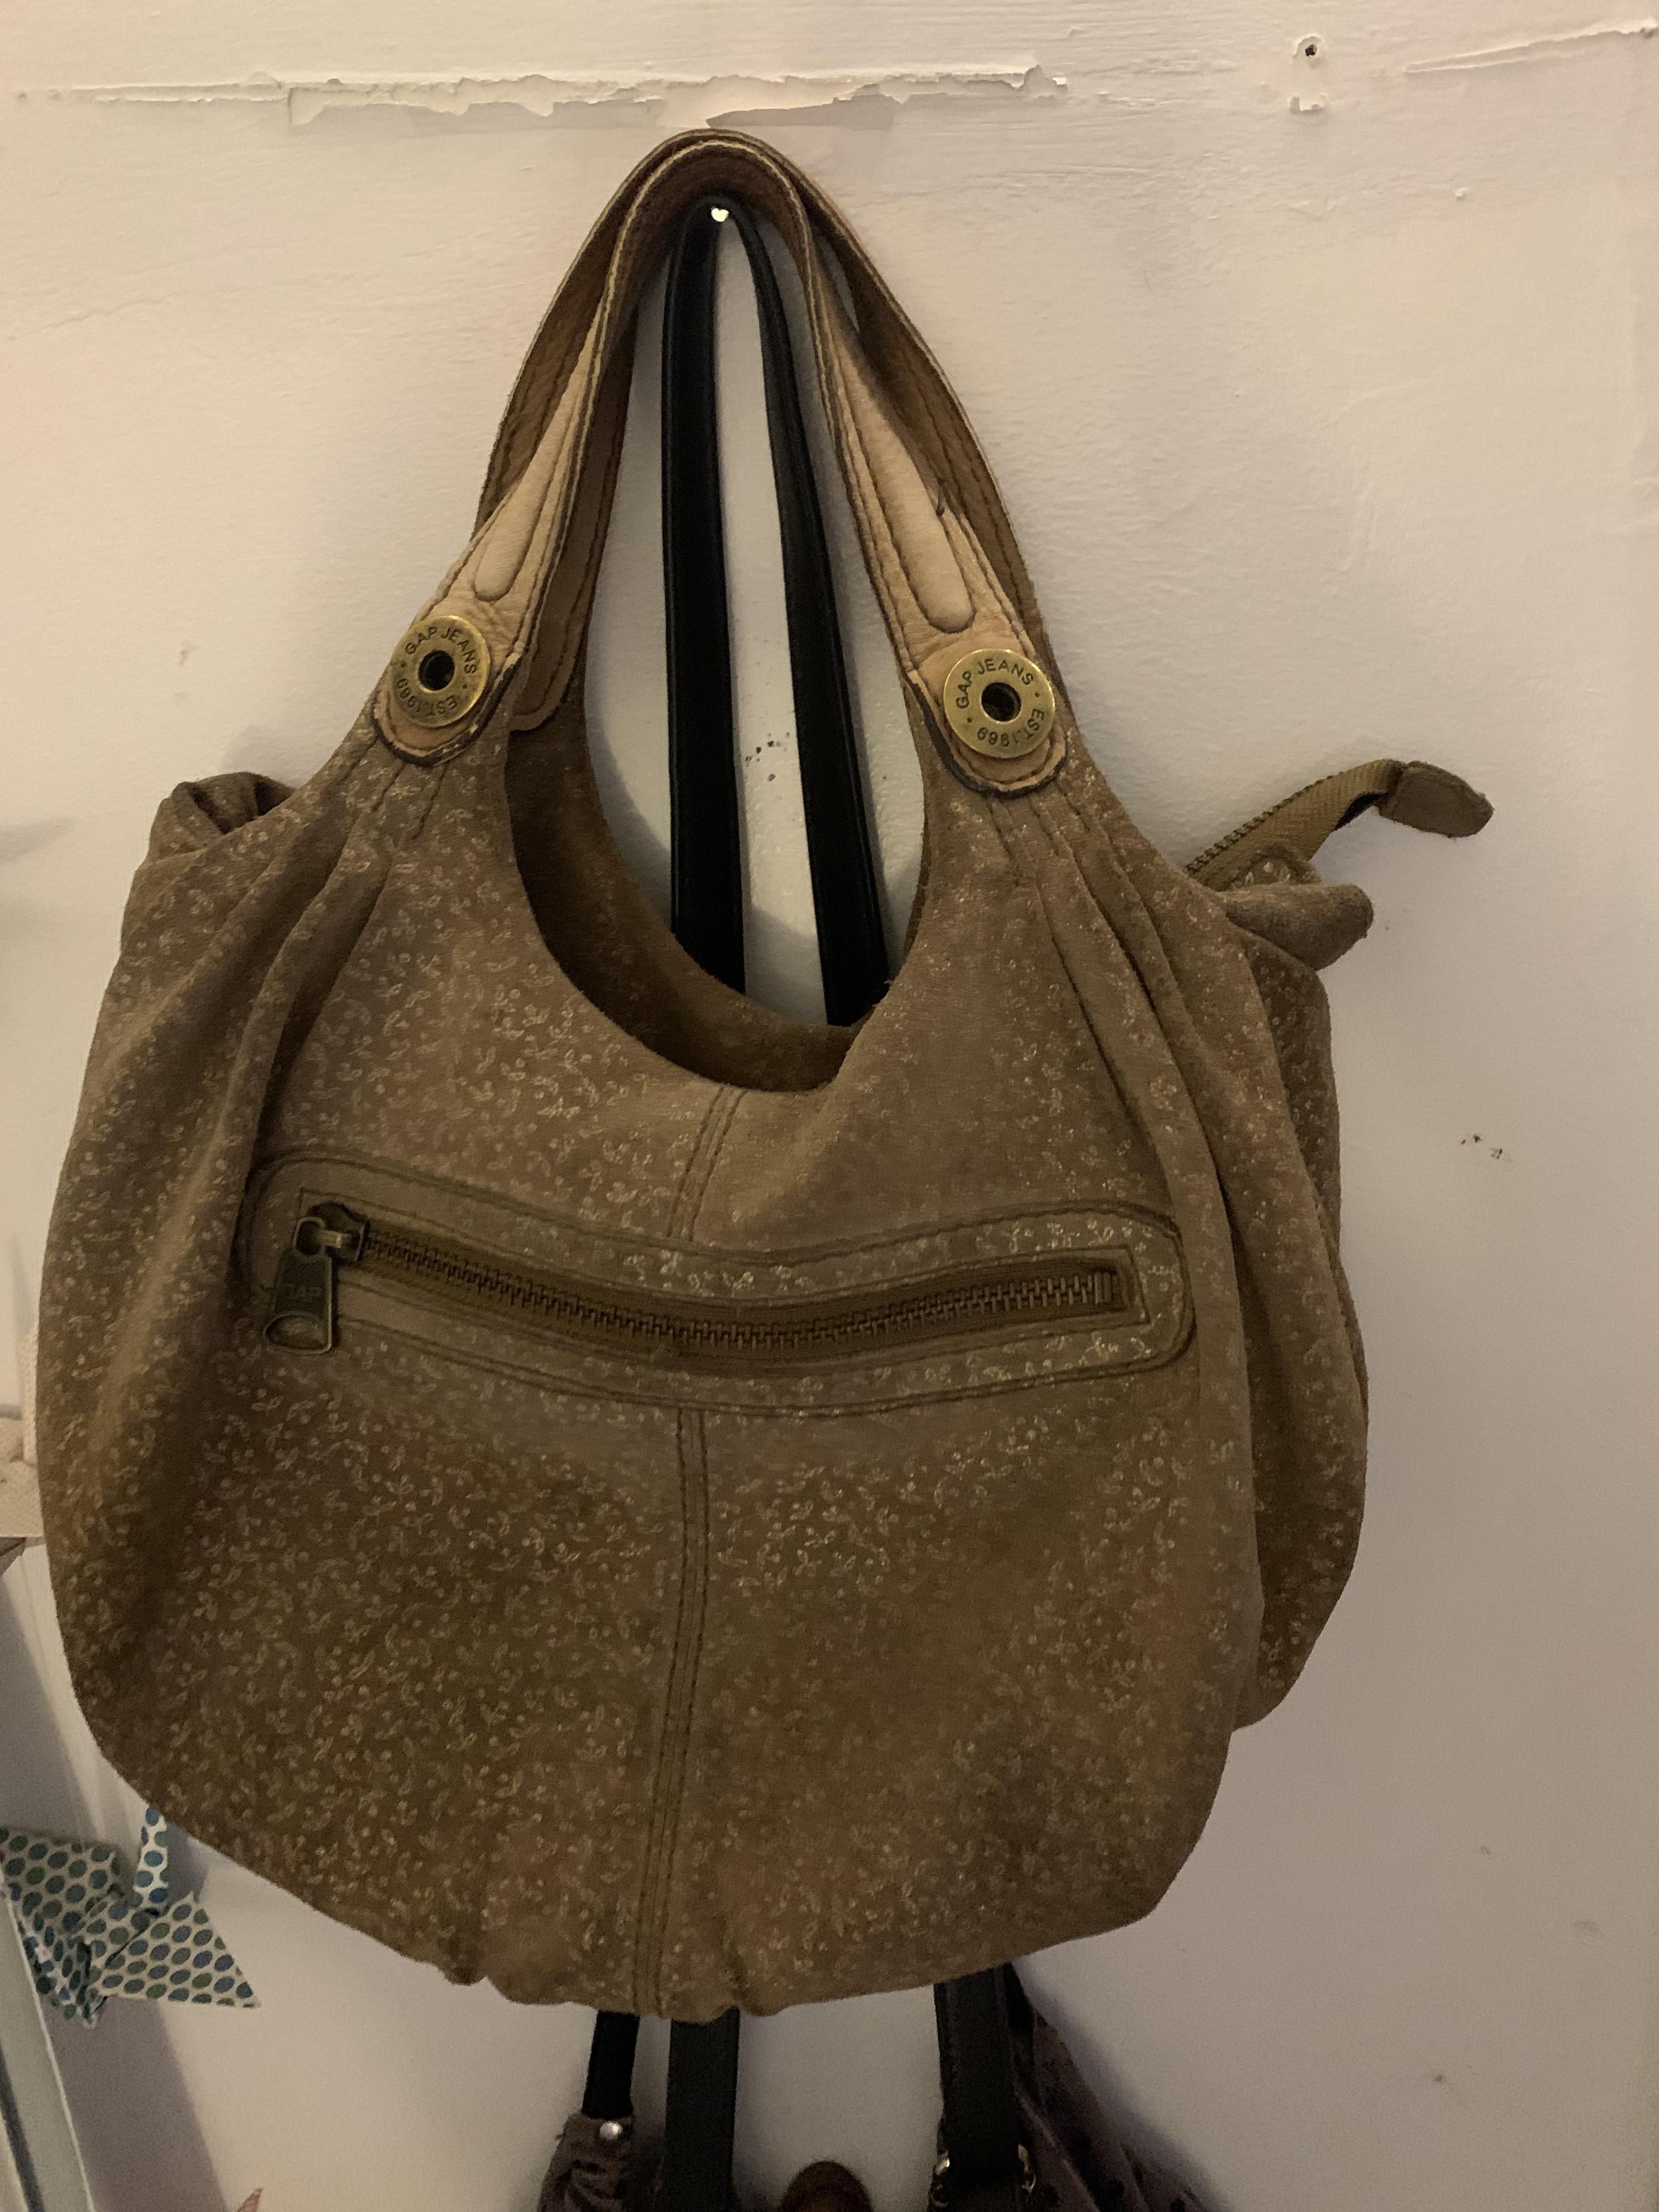 My friends and I drank together at my home. We decided my bag is a toad.